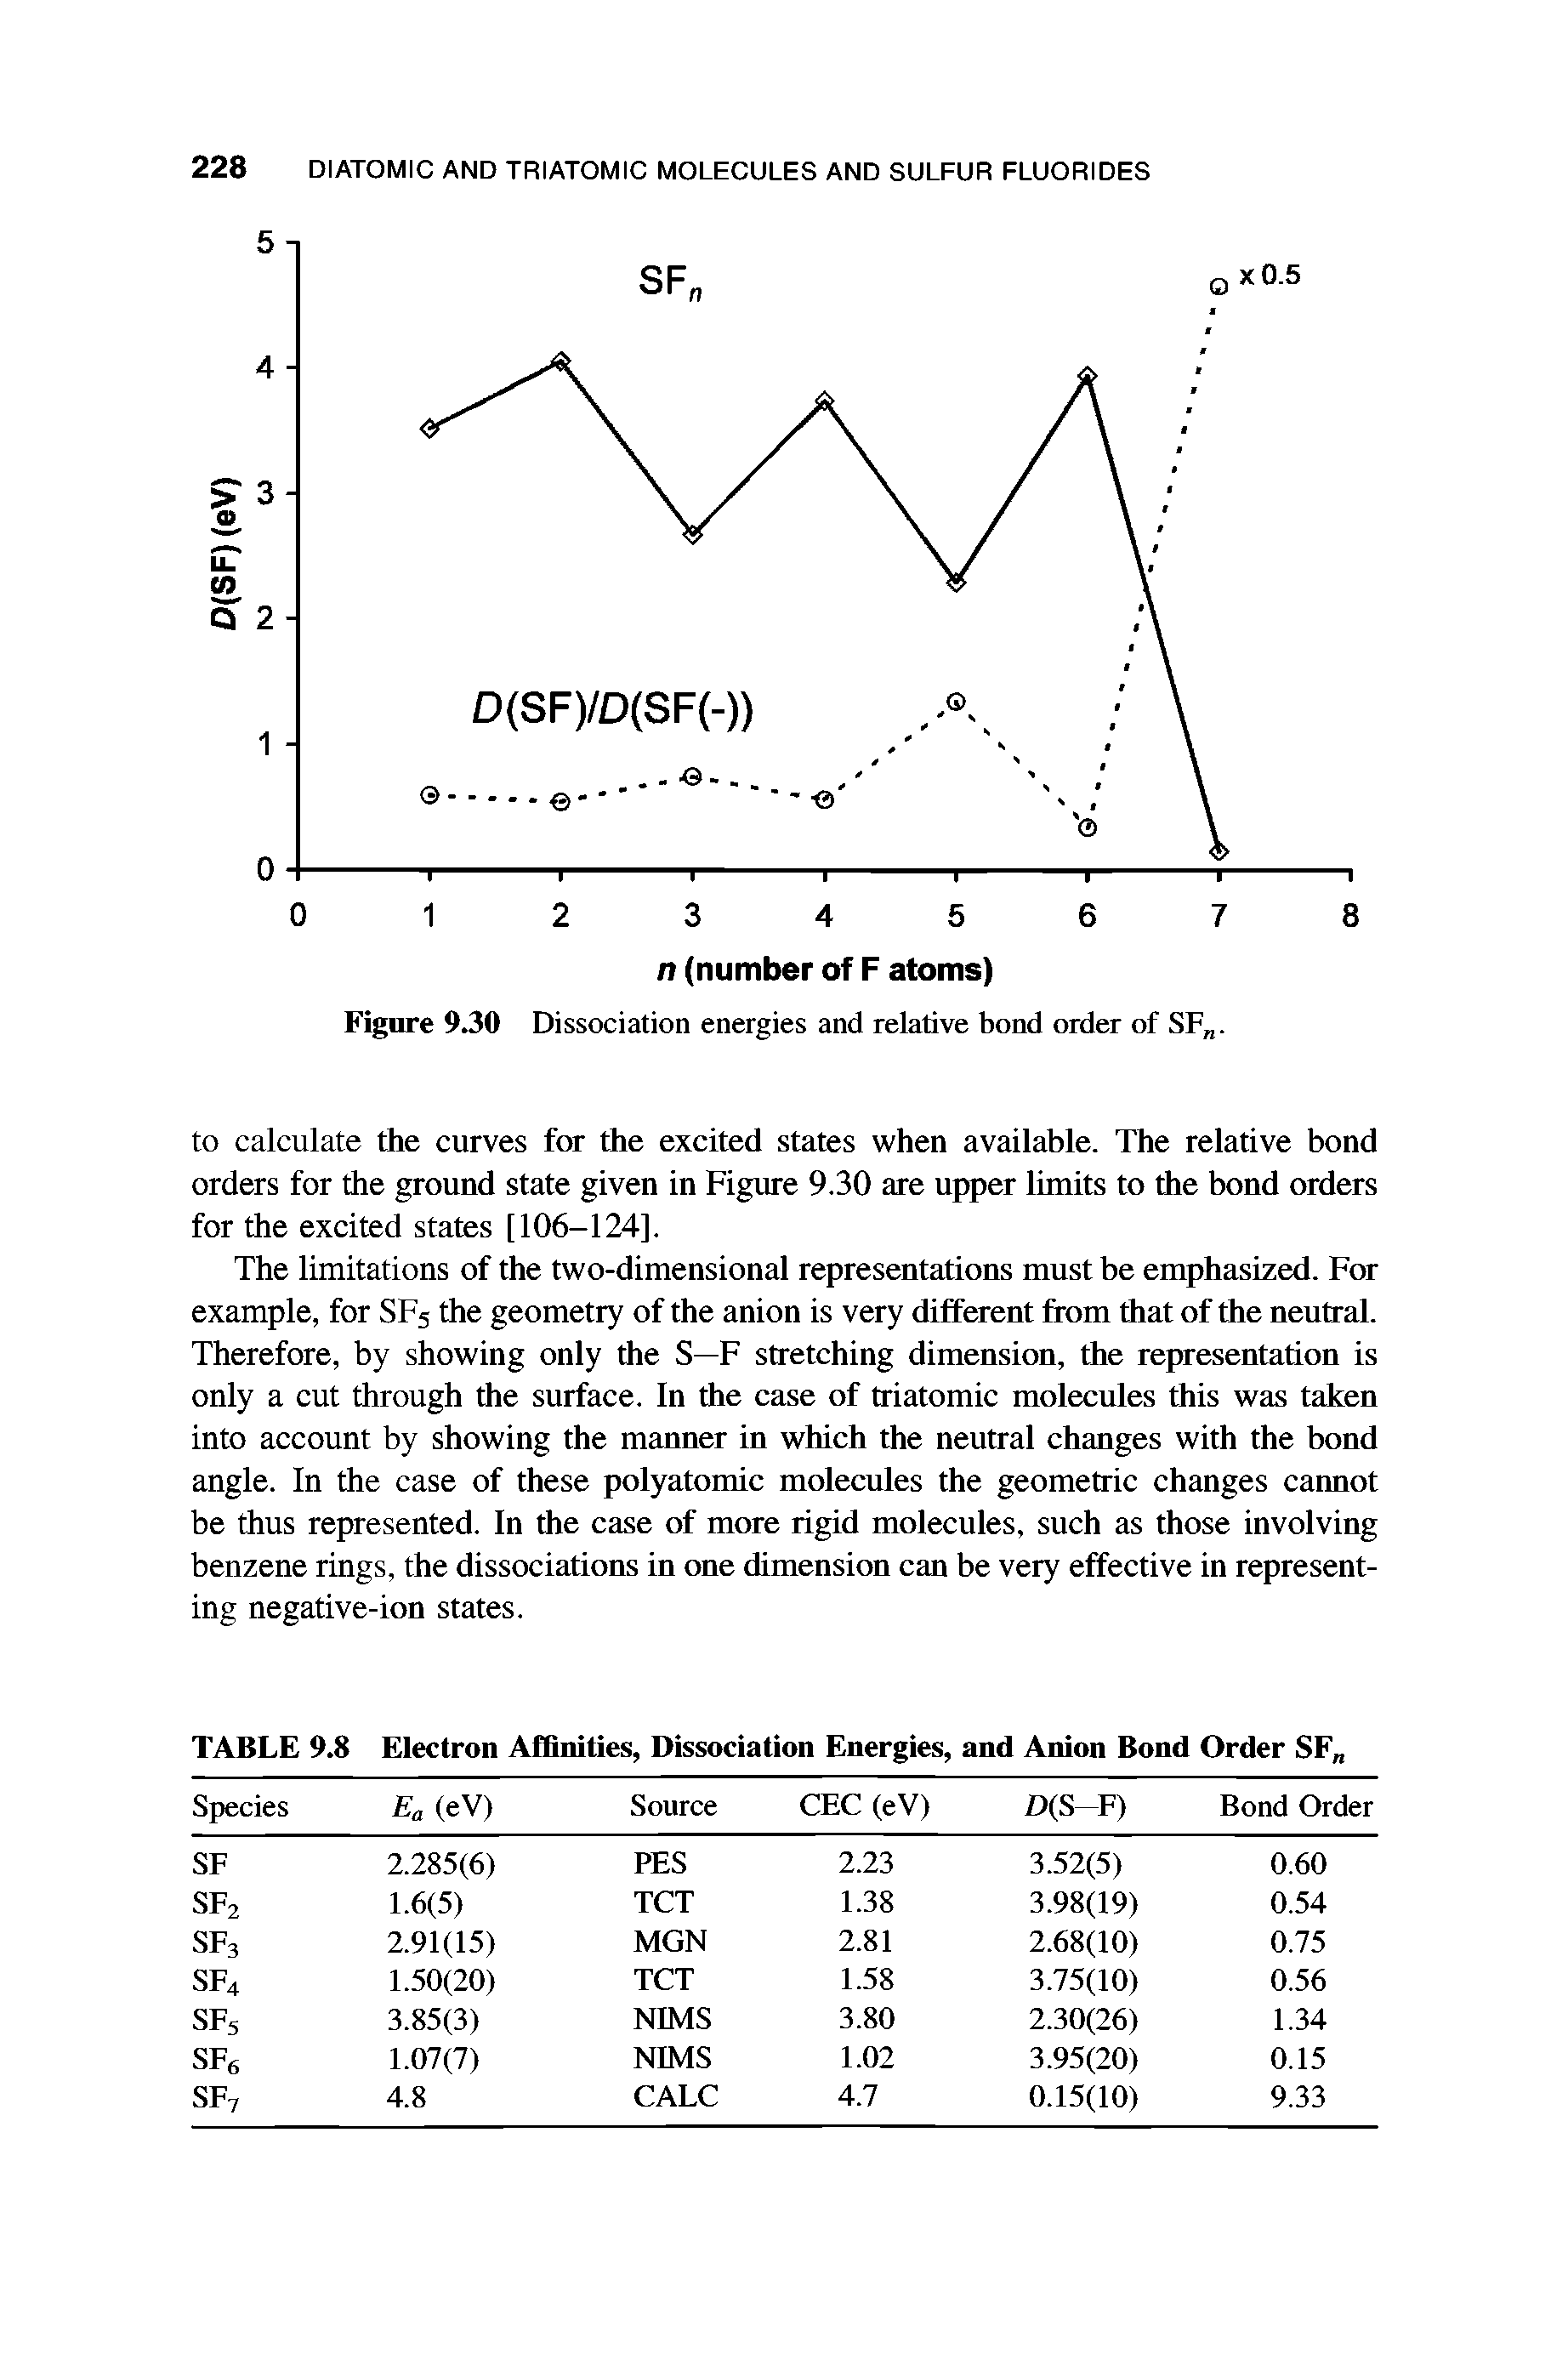 Figure 9.30 Dissociation energies and relative bond order of SF .